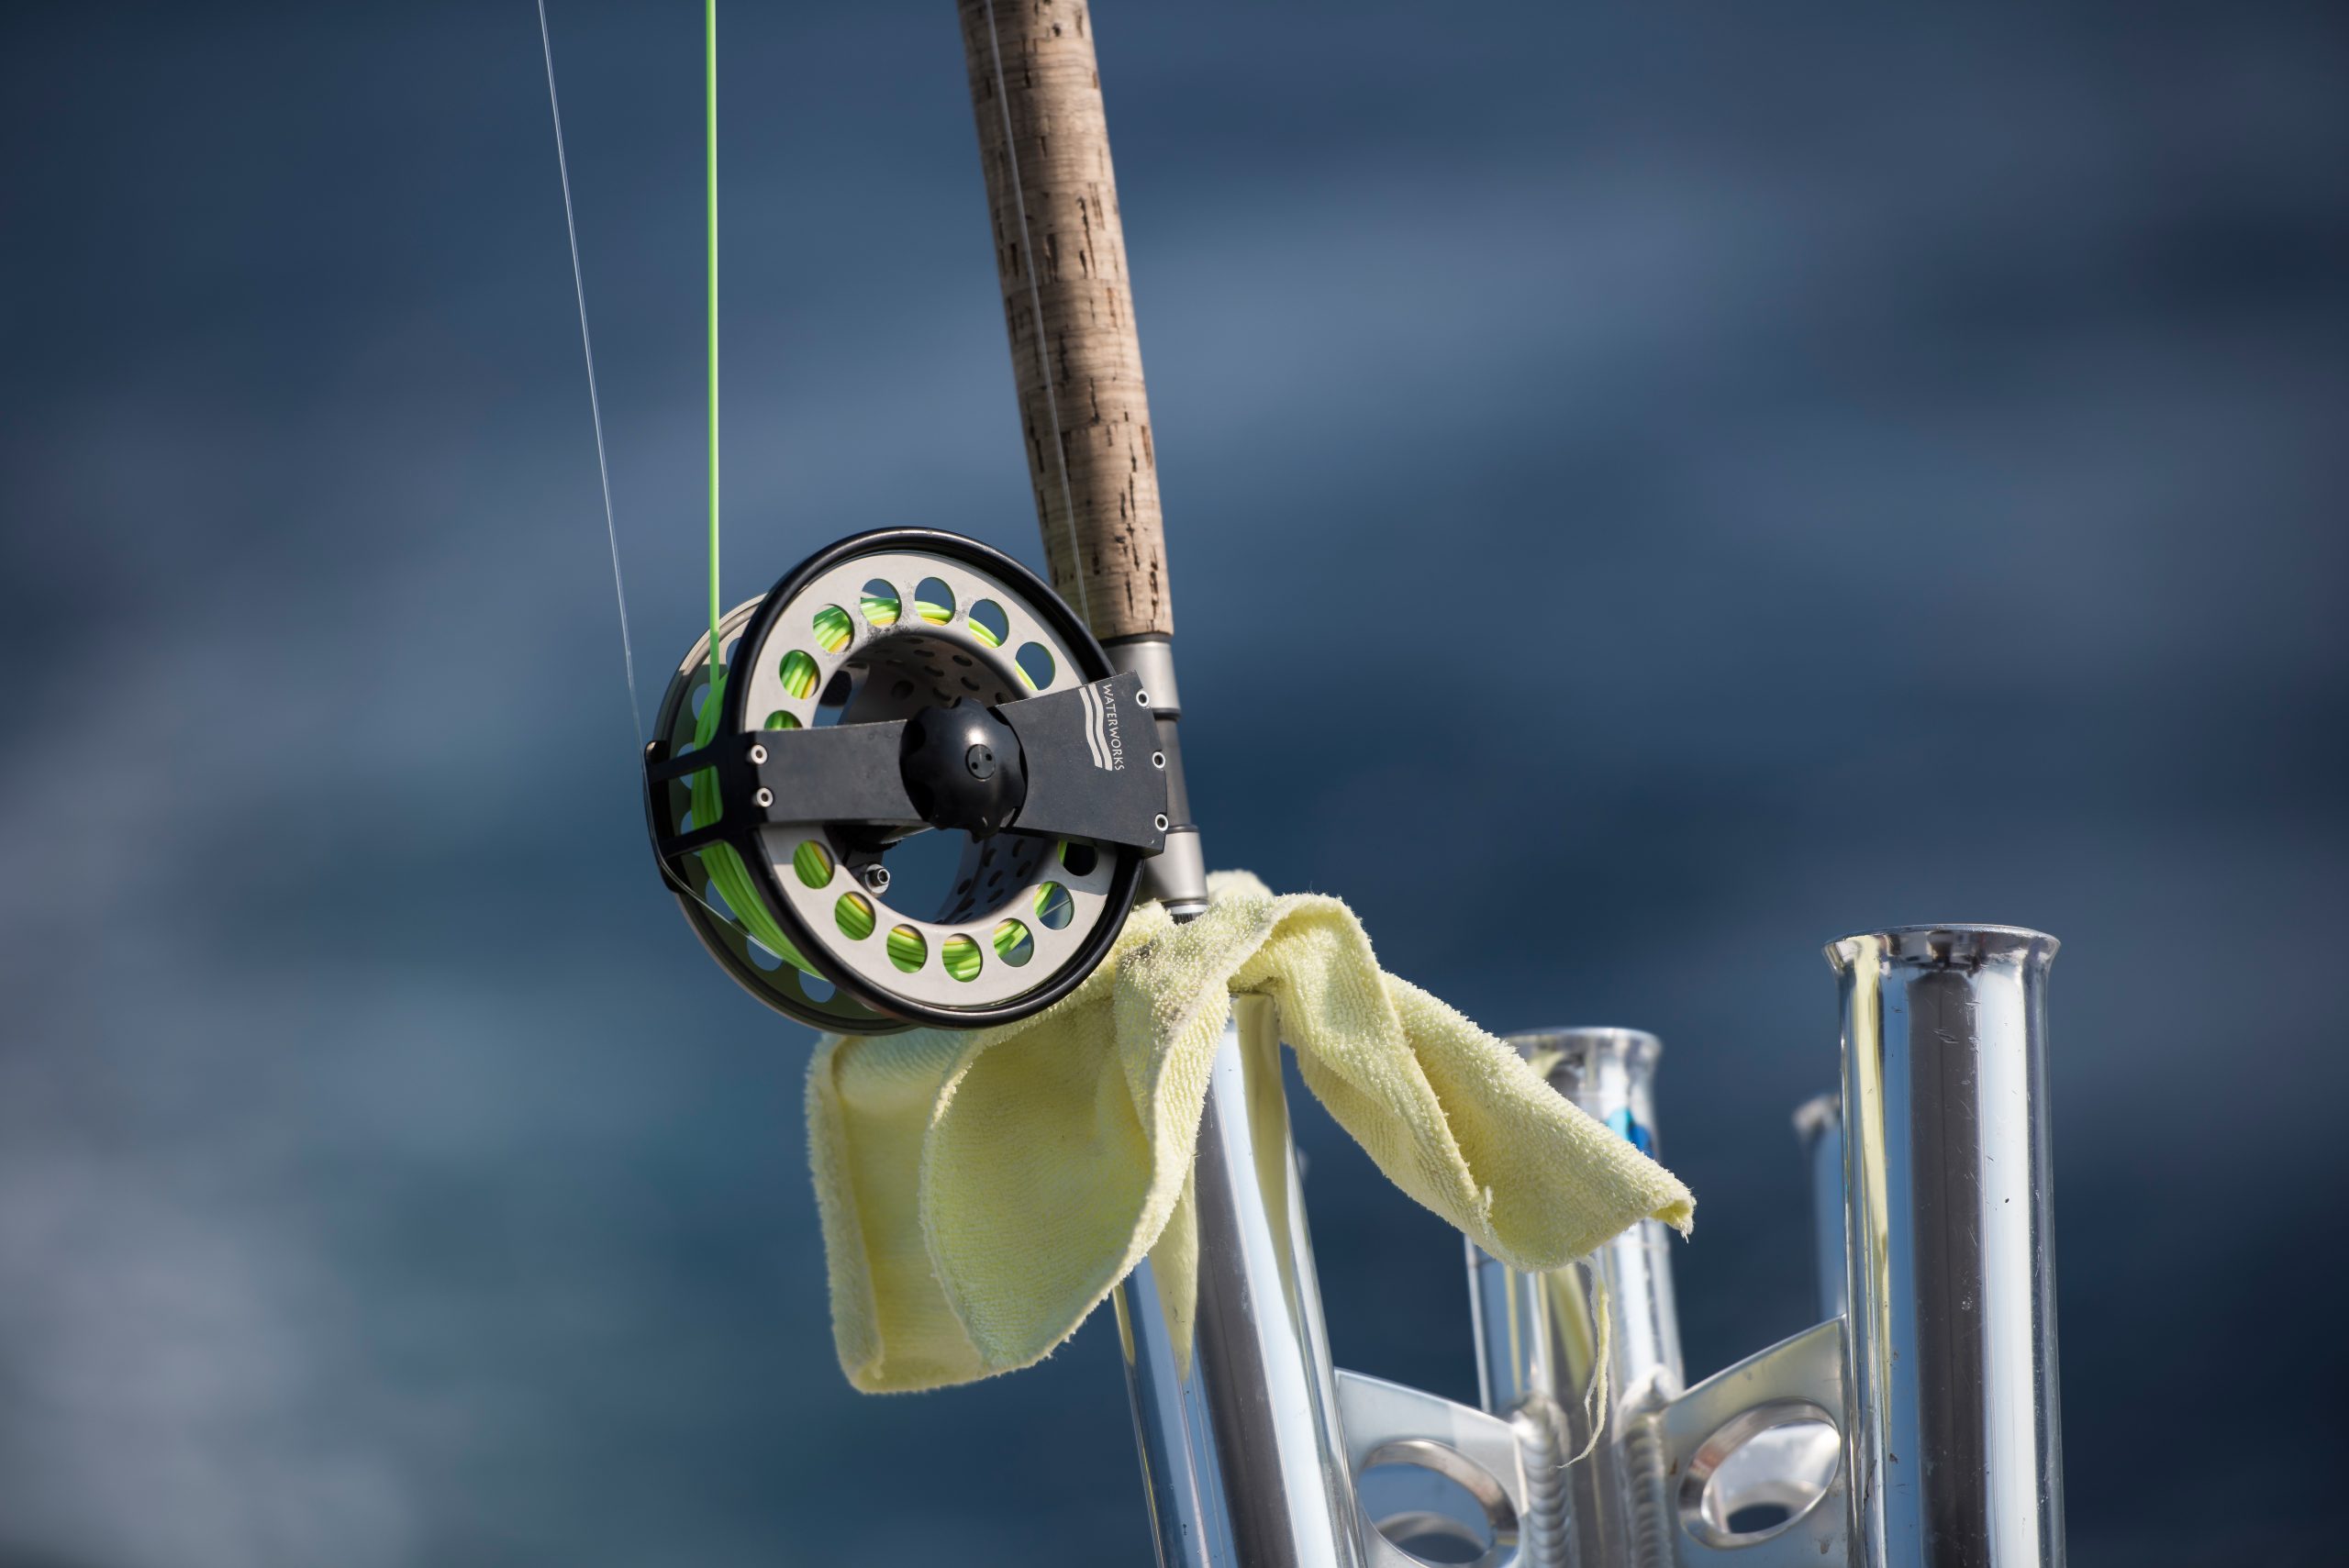 Ready to do battle with an ocean-going speedster, this fly reel is loaded with a heavy-weight fly line and a half-mile of 50-pound backing. 